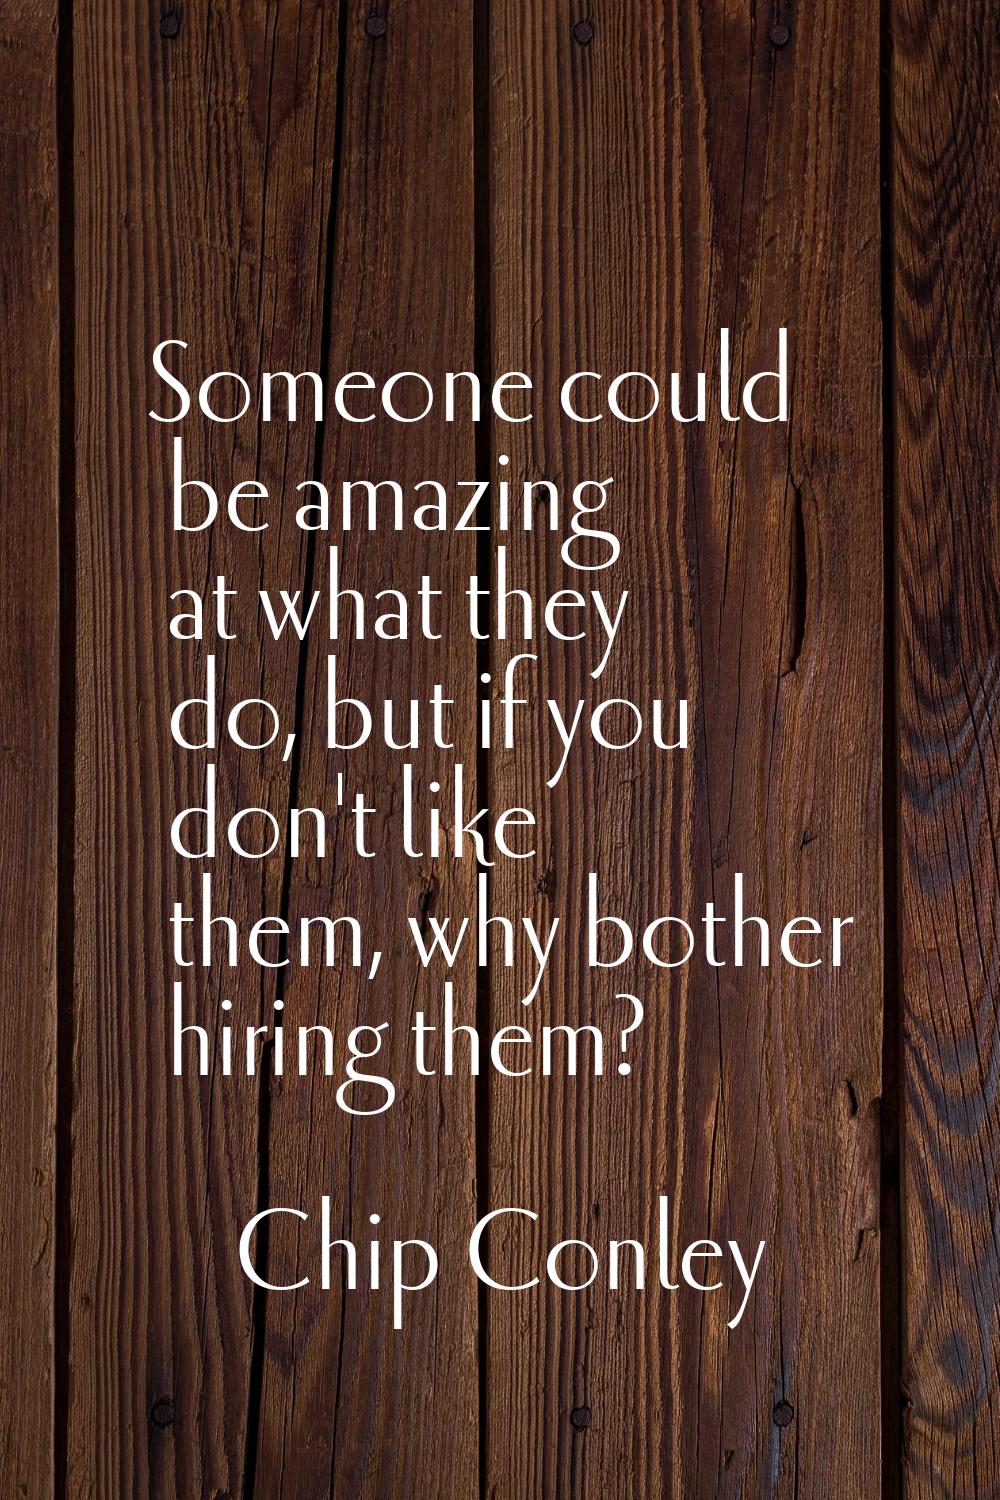 Someone could be amazing at what they do, but if you don't like them, why bother hiring them?